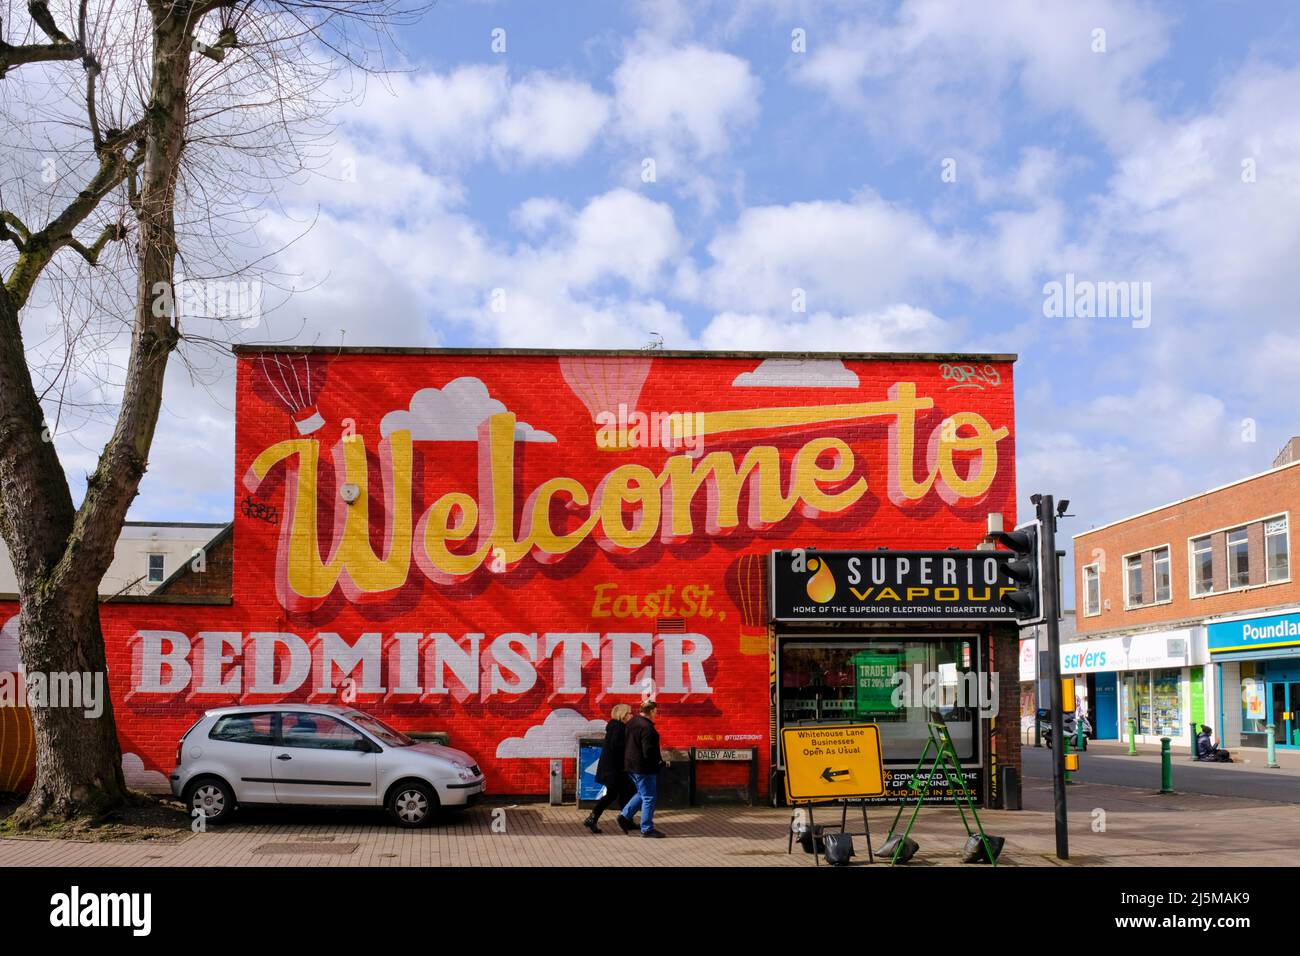 Around Bedminster, a district of Bristol. Welcome sign on east st. Stock Photo